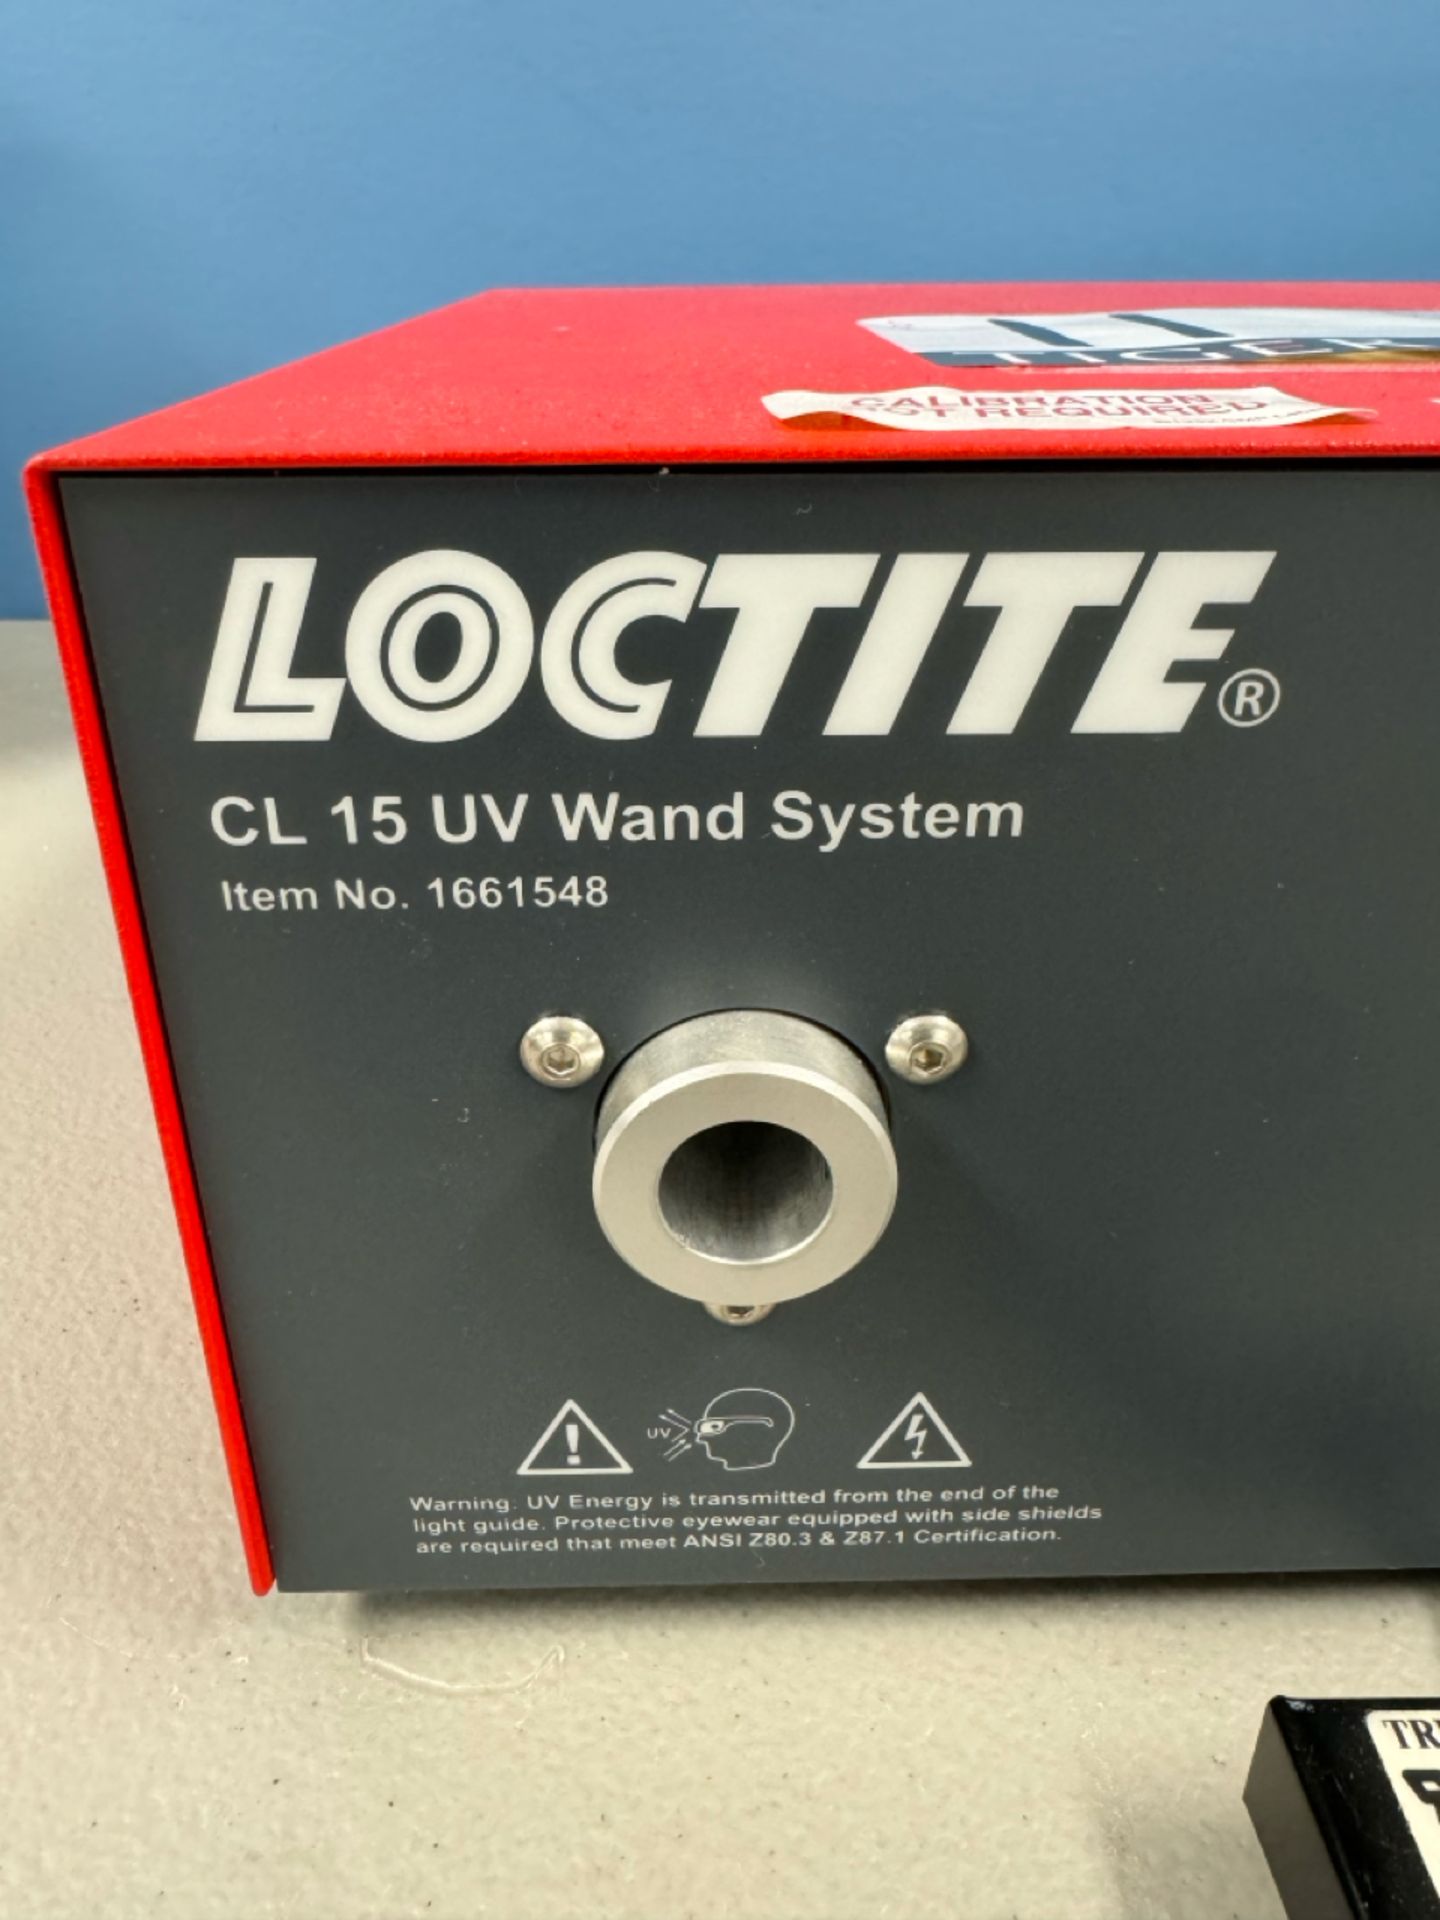 Loctite UV Wand System - Image 2 of 4